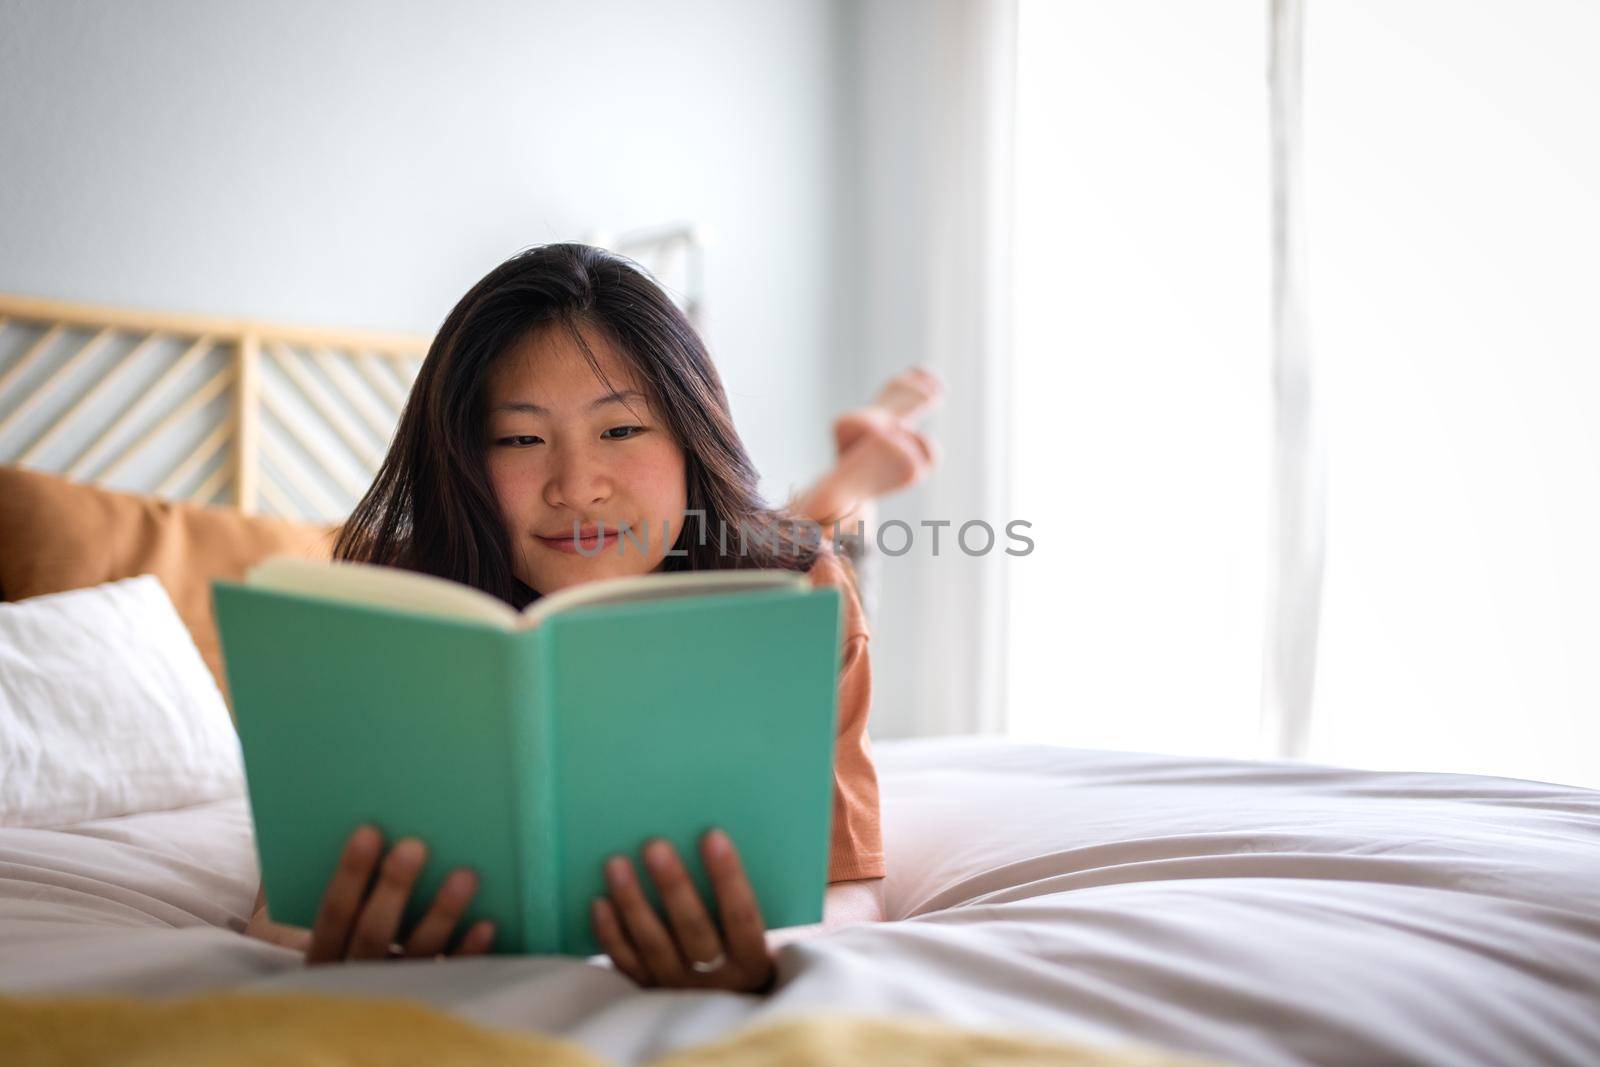 Teen asian college student reading book at home lying on bed in cozy room. Copy space. Comfort, leisure and home concepts.